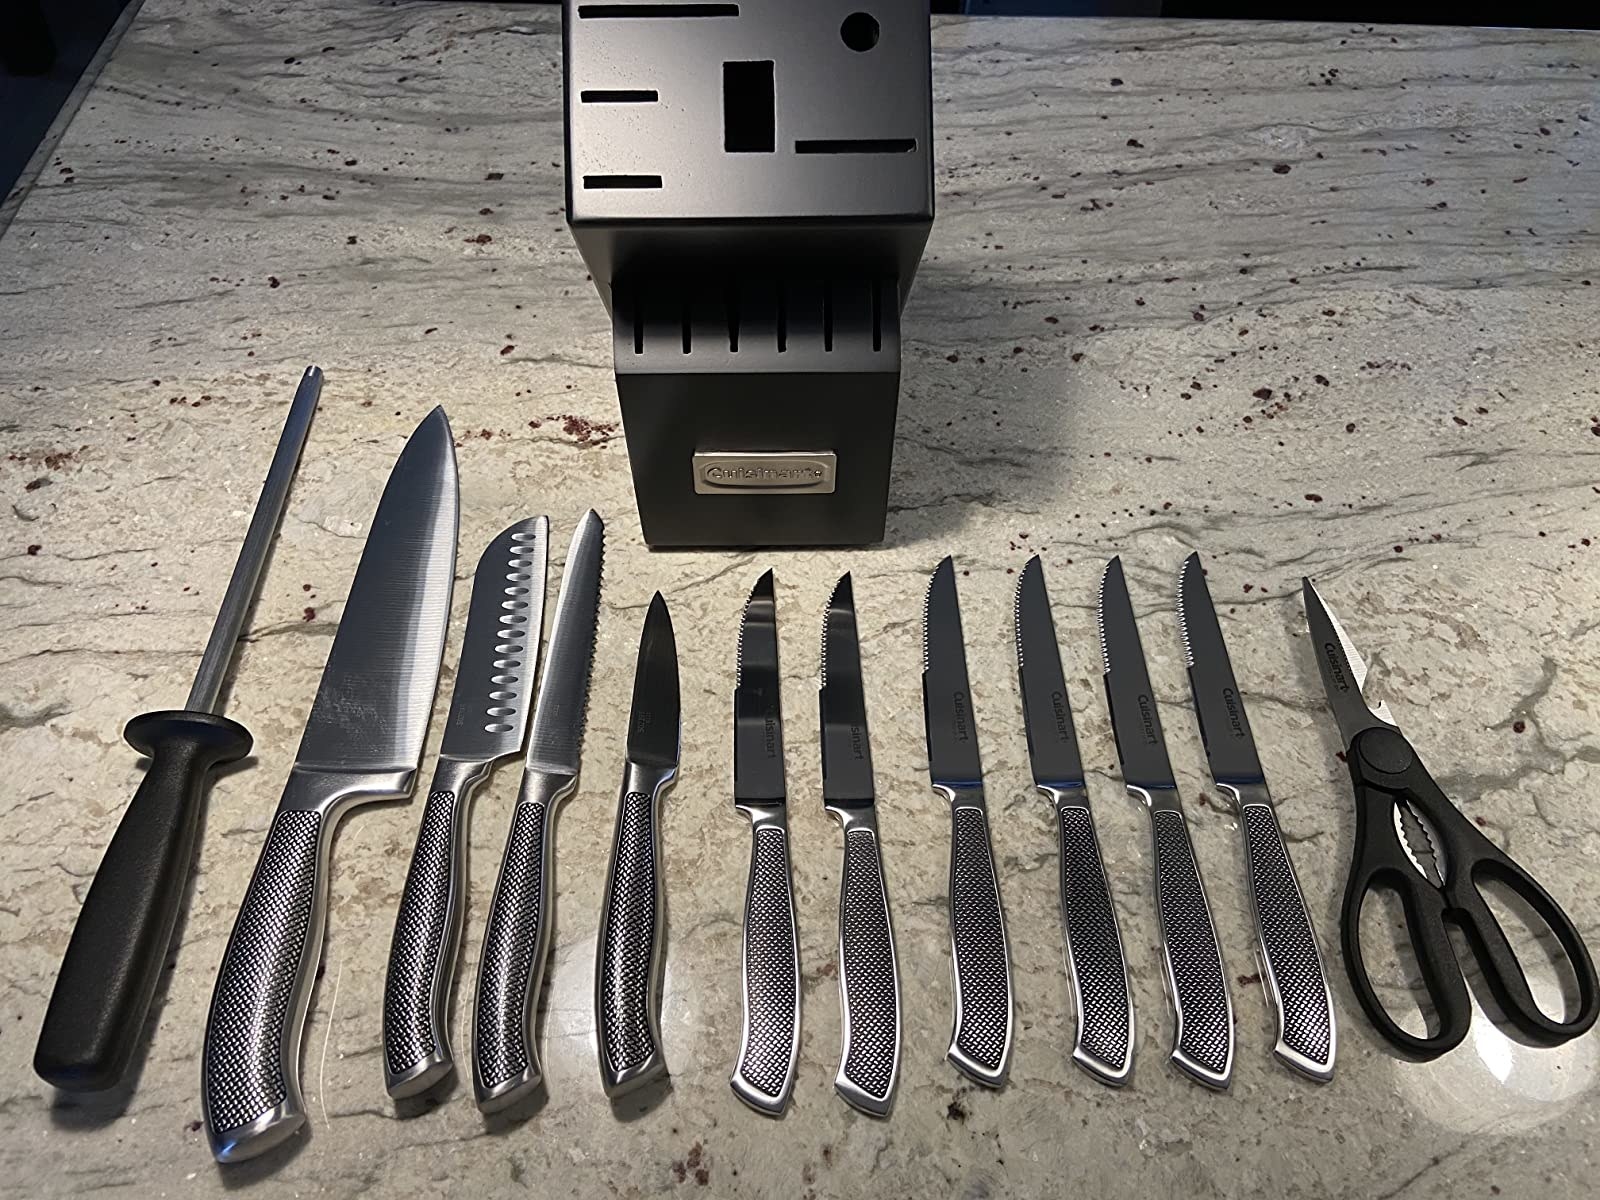 reviewer image of the 13 piece cuisinart graphix knife set laid out on a kitchen counter